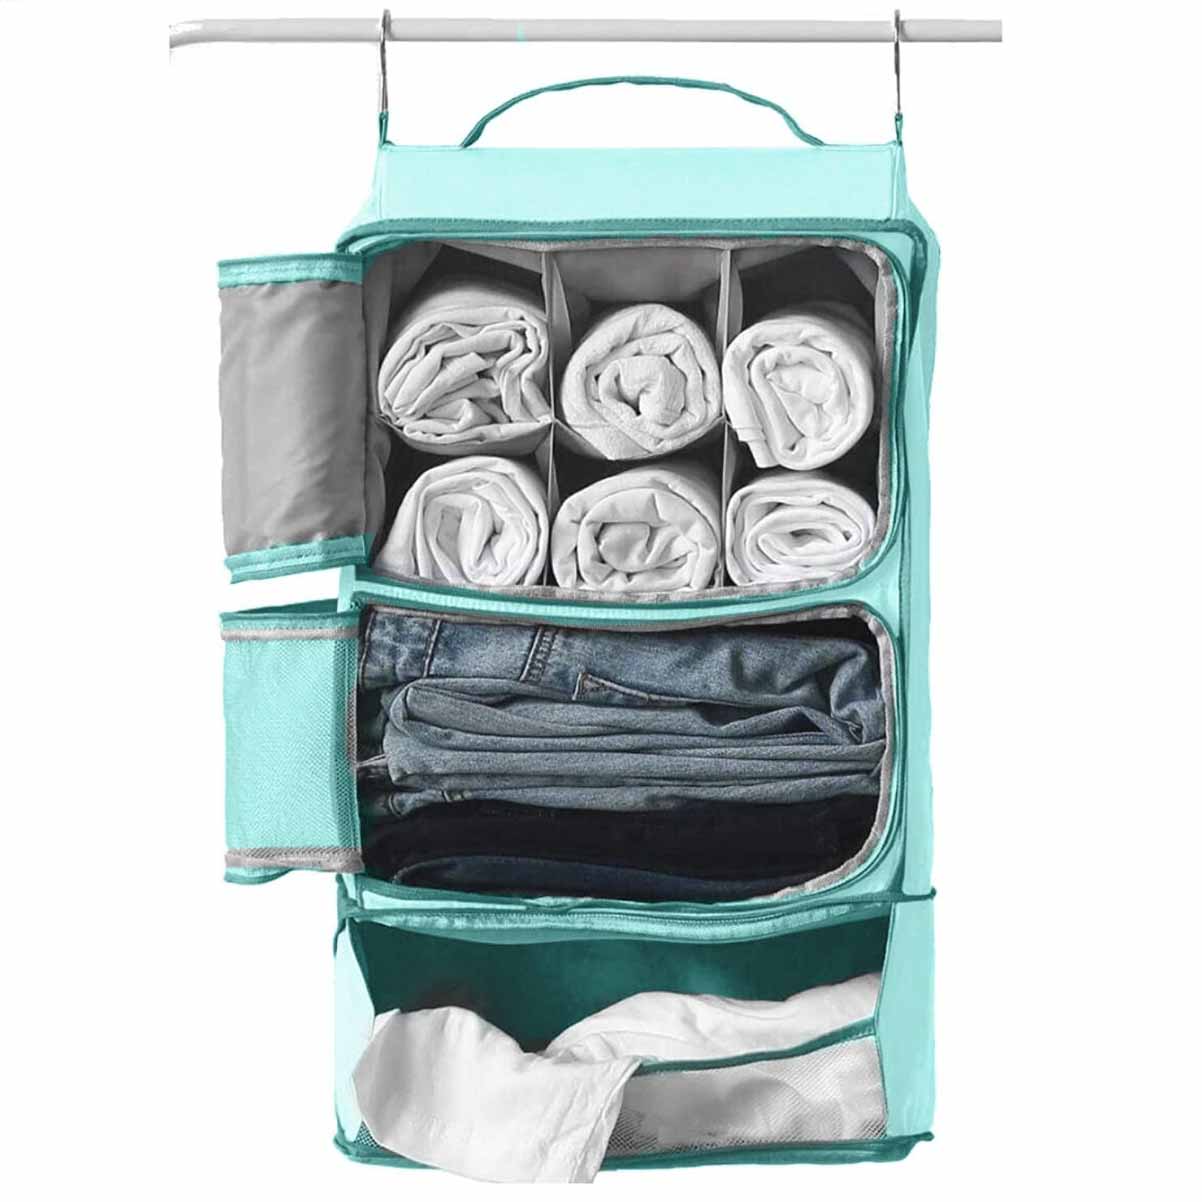 Hanging packing cube in light blue